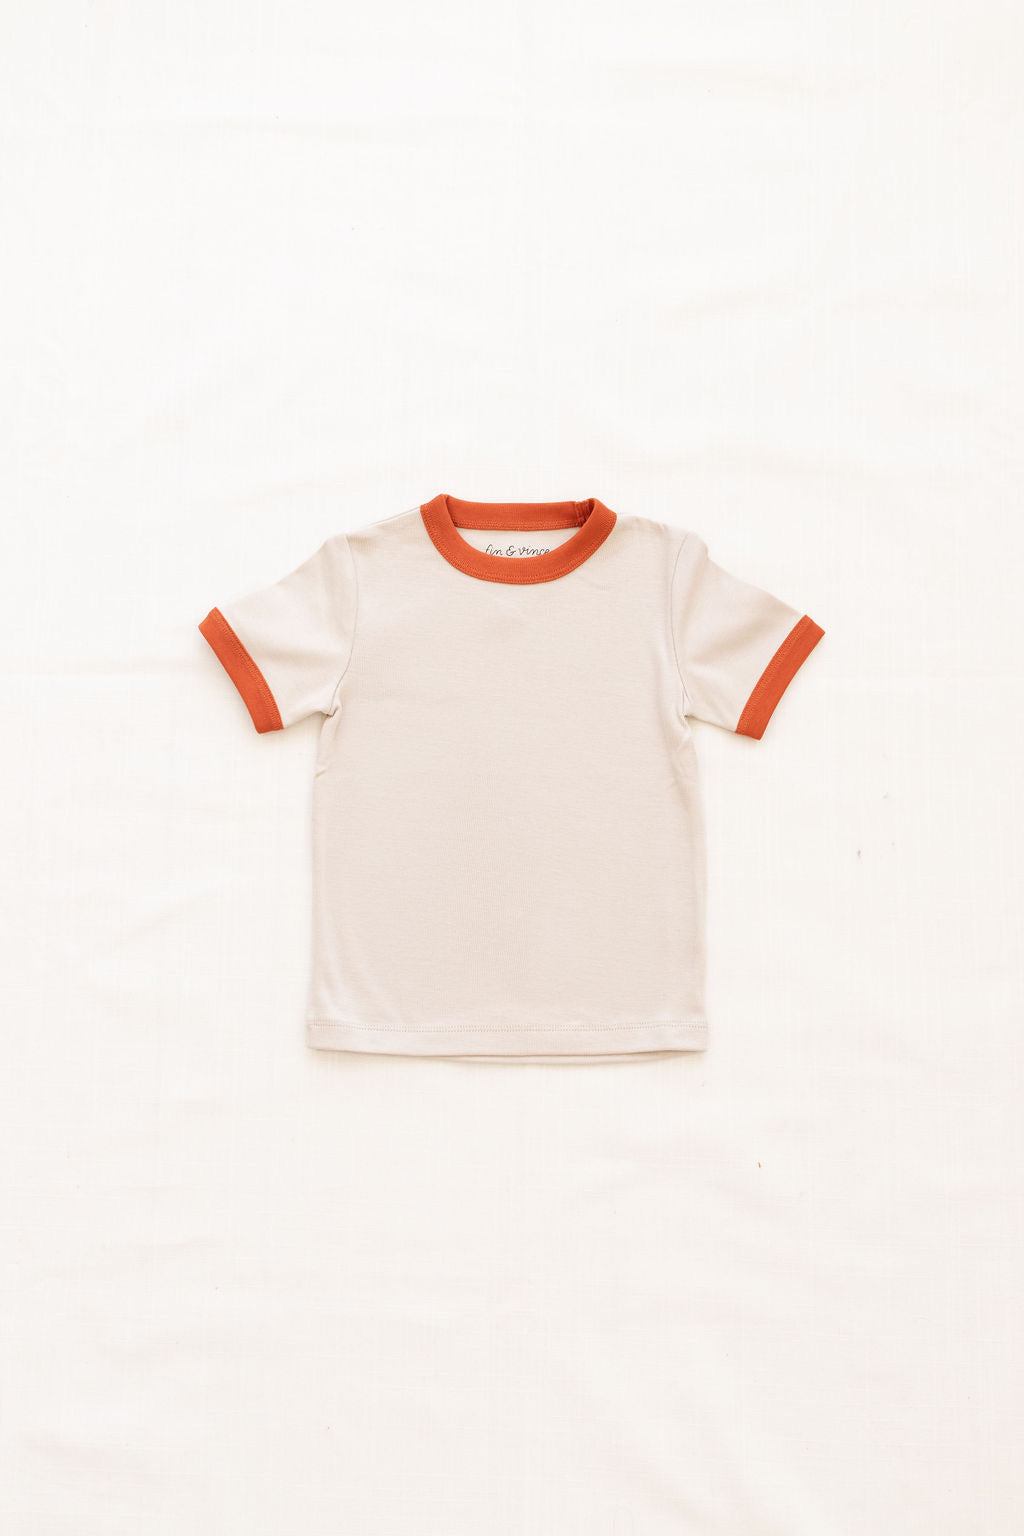 Fin & Vince Vintage Tee Oat with Brick accents